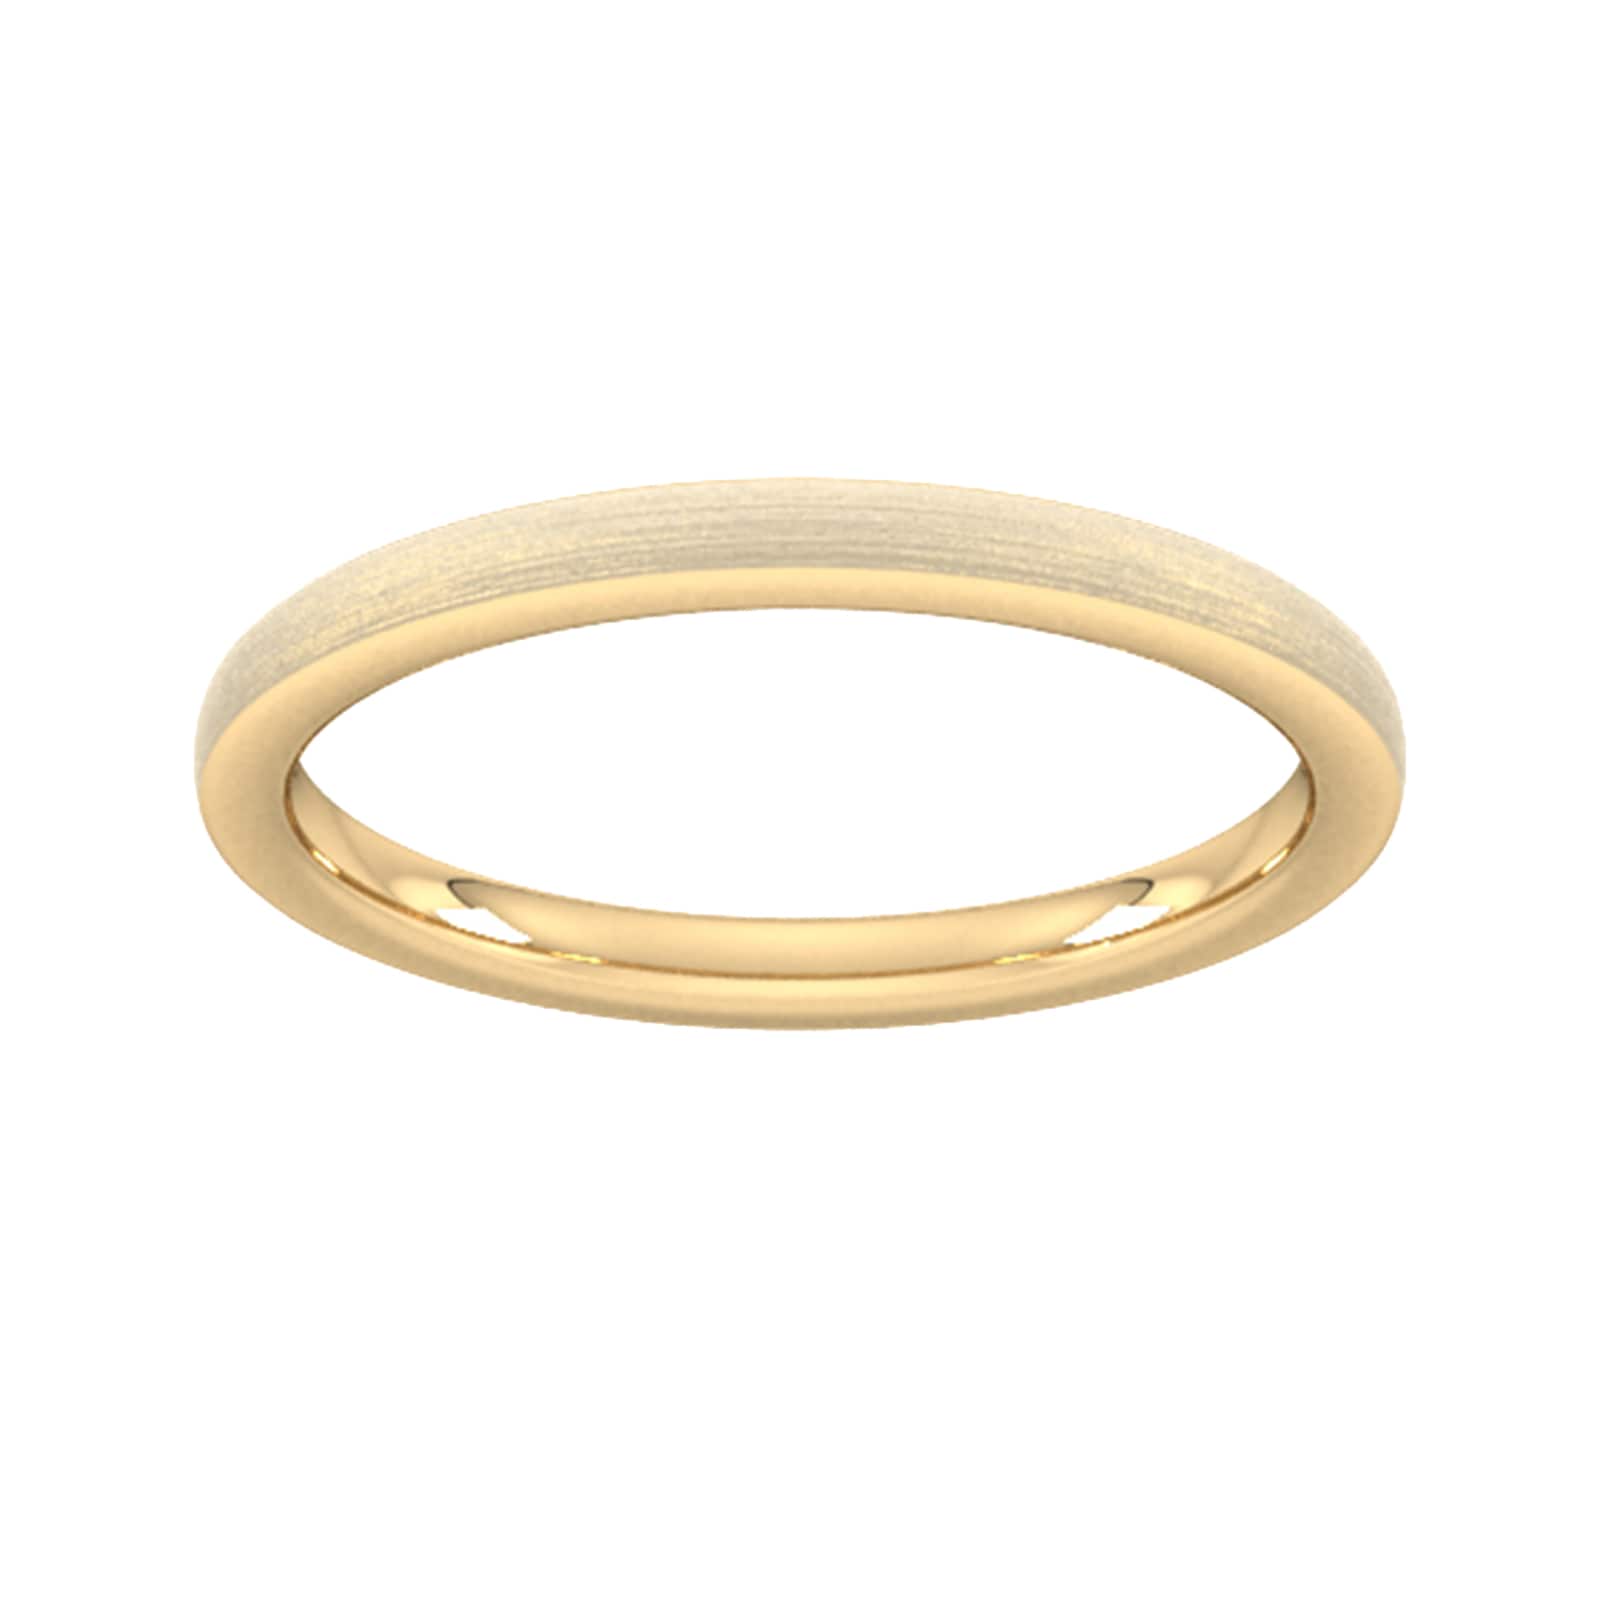 2mm Flat Court Heavy Polished Chamfered Edges With Matt Centre Wedding Ring In 18 Carat Yellow Gold - Ring Size J